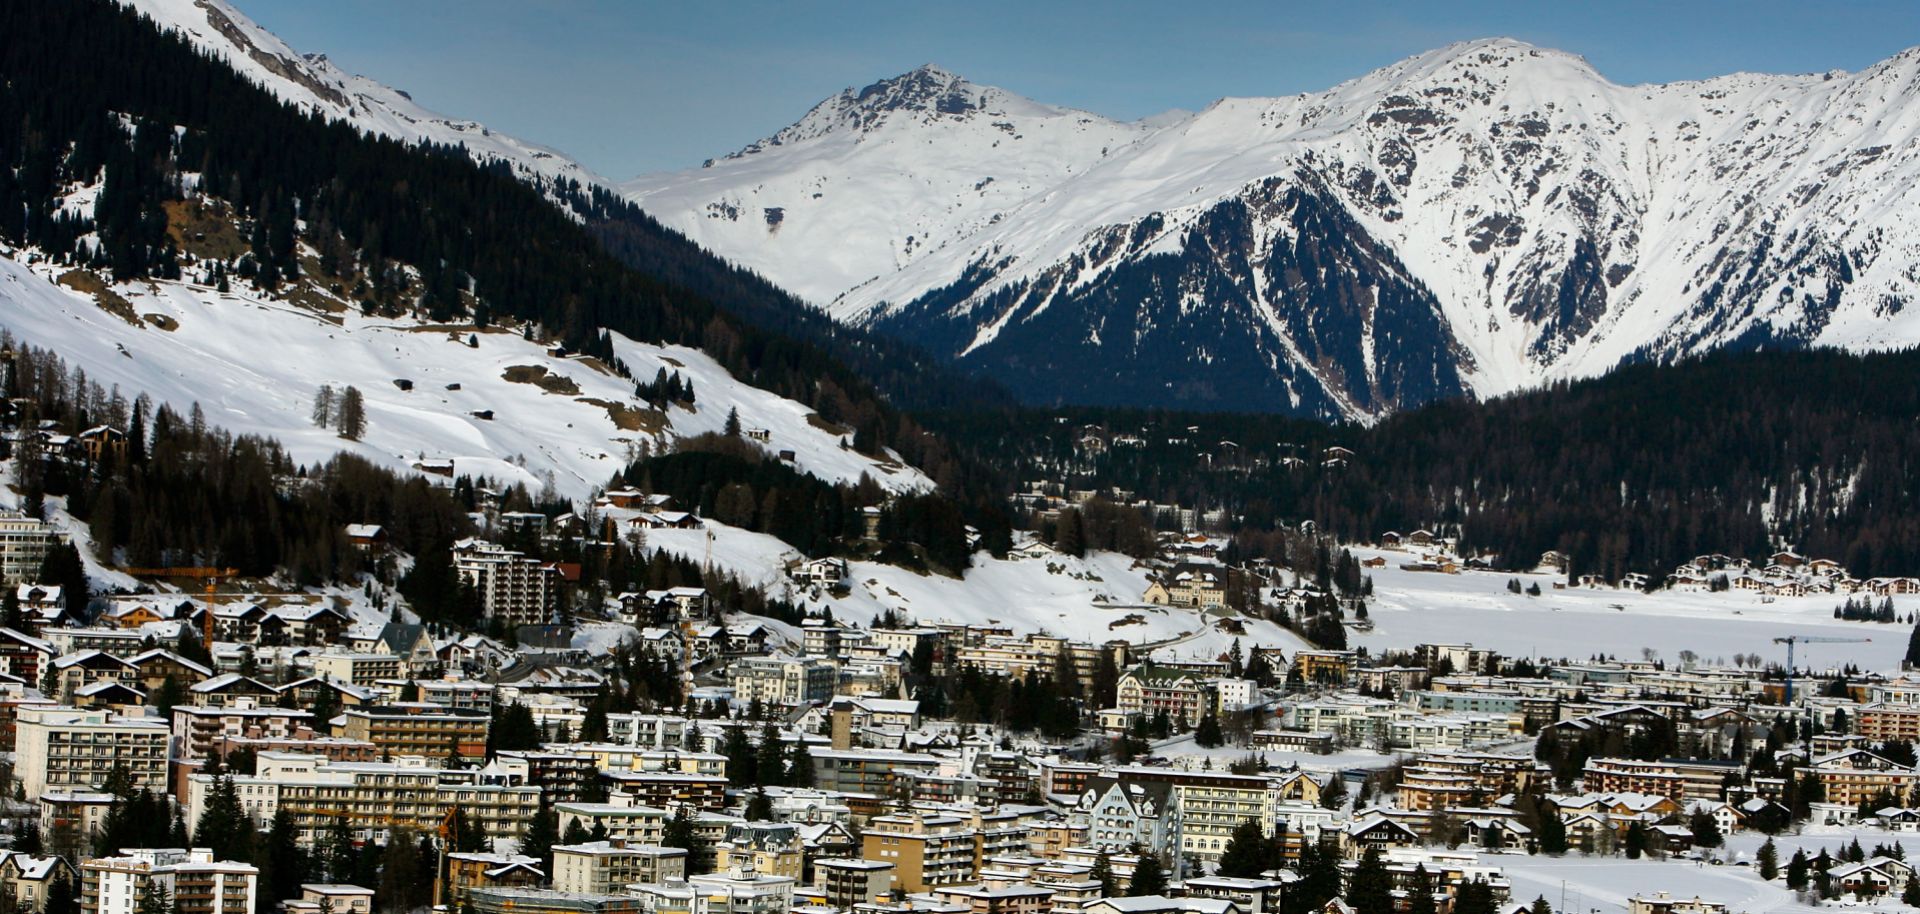 The world's business and political leaders are gathering this week in Davos, Switzerland, for the World Economic Forum.